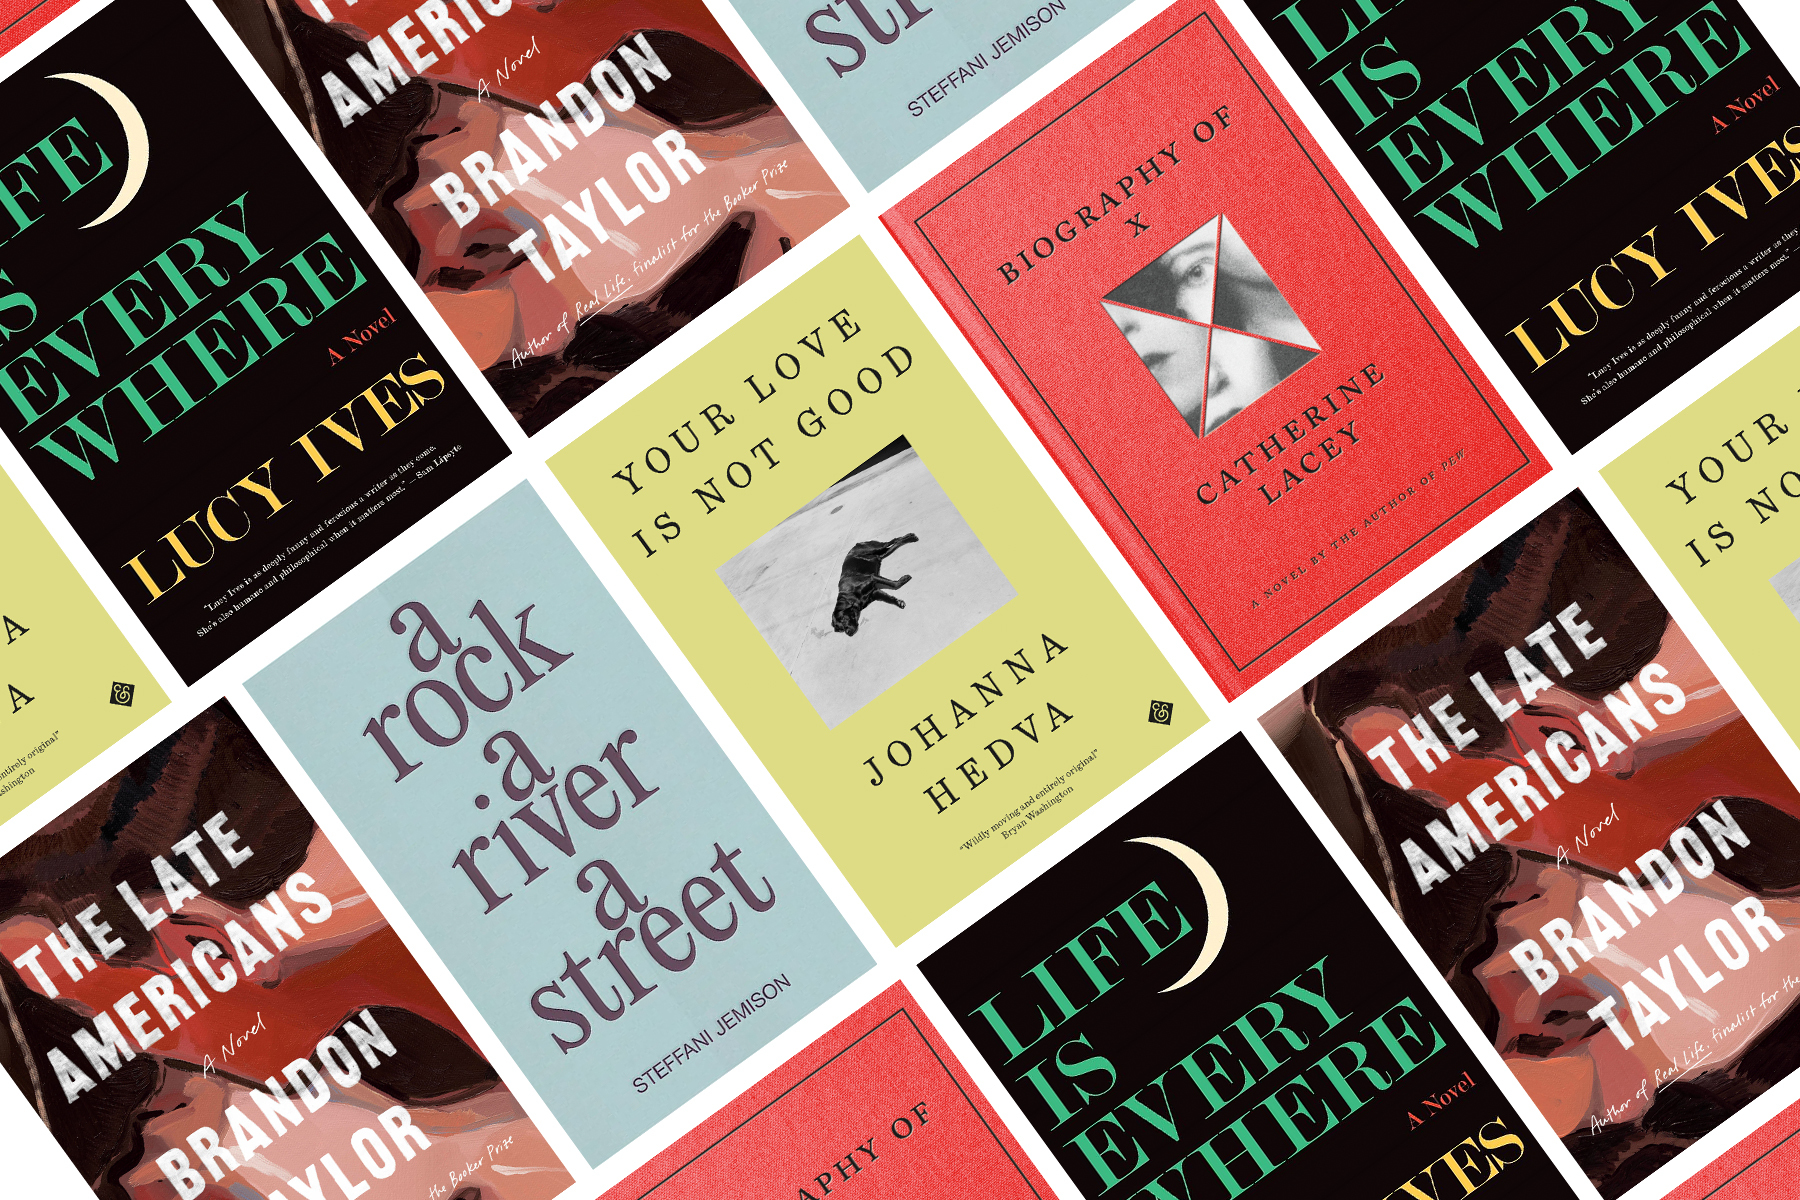 Book covers in a diagonal grid